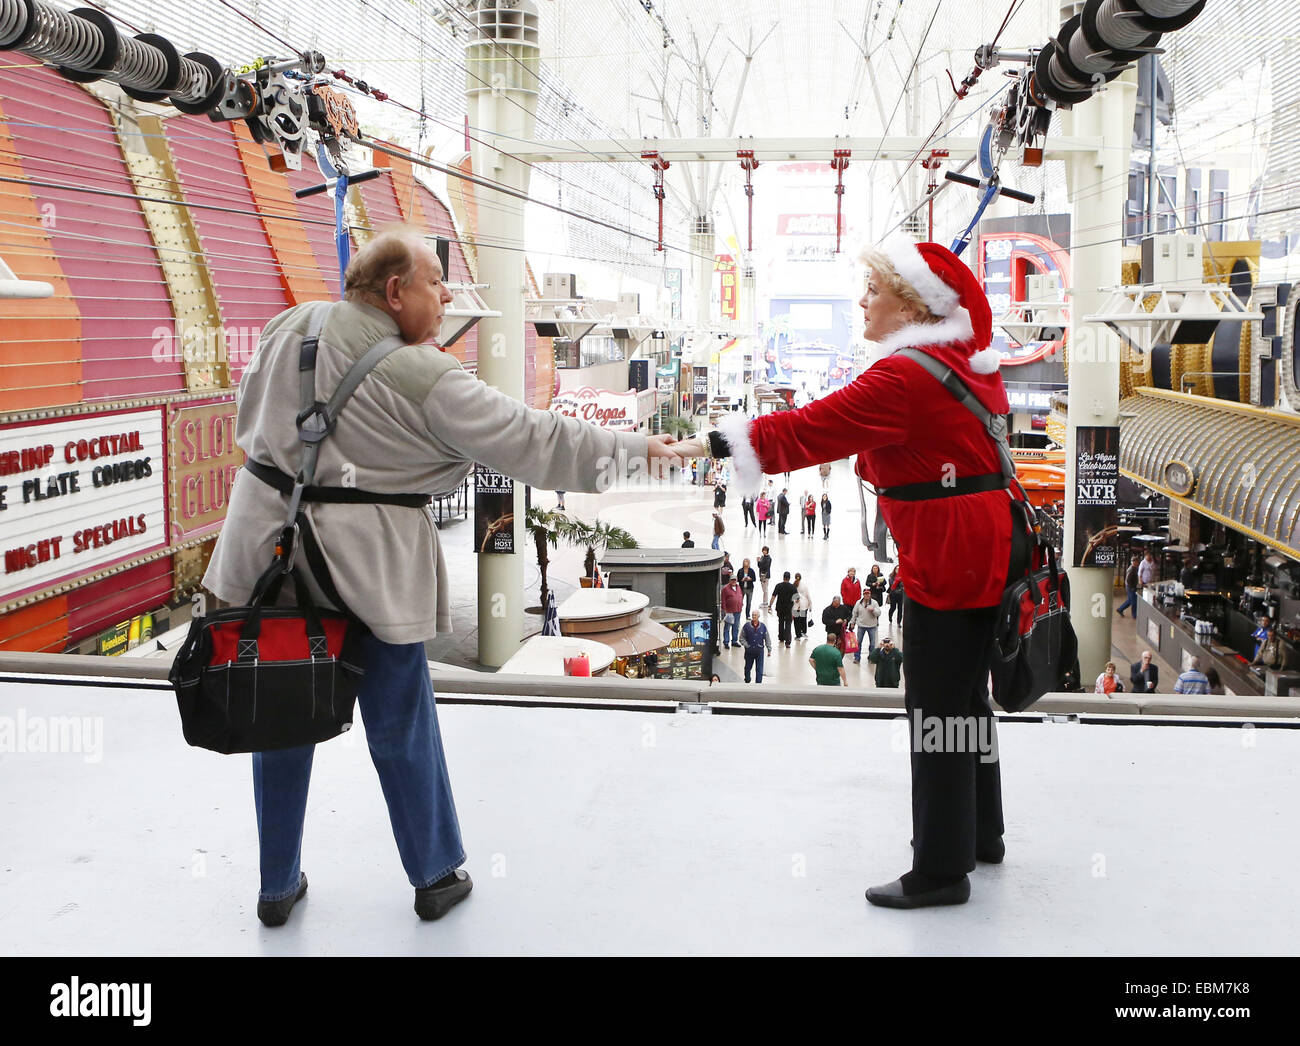 Las Vegas, NV, USA. 2nd Dec, 2014. Mayor of Las Vegas CAROLYN GOODMAN, right, and entertainment personality ROBIN LEACH hold hands after dashing down the larger-than-life SlotZilla zipline on Tuesday, Dec. 2, 2014 in Las Vegas. LEACH and GOODMAN challenged each other to ride SlotZilla in return for a $5,000 each donation to Las Vegas charity event, the Great Santa Run, taking place Saturday, December 6. Credit:  Bizuayehu Tesfaye/ZUMA Wire/ZUMAPRESS.com/Alamy Live News Stock Photo